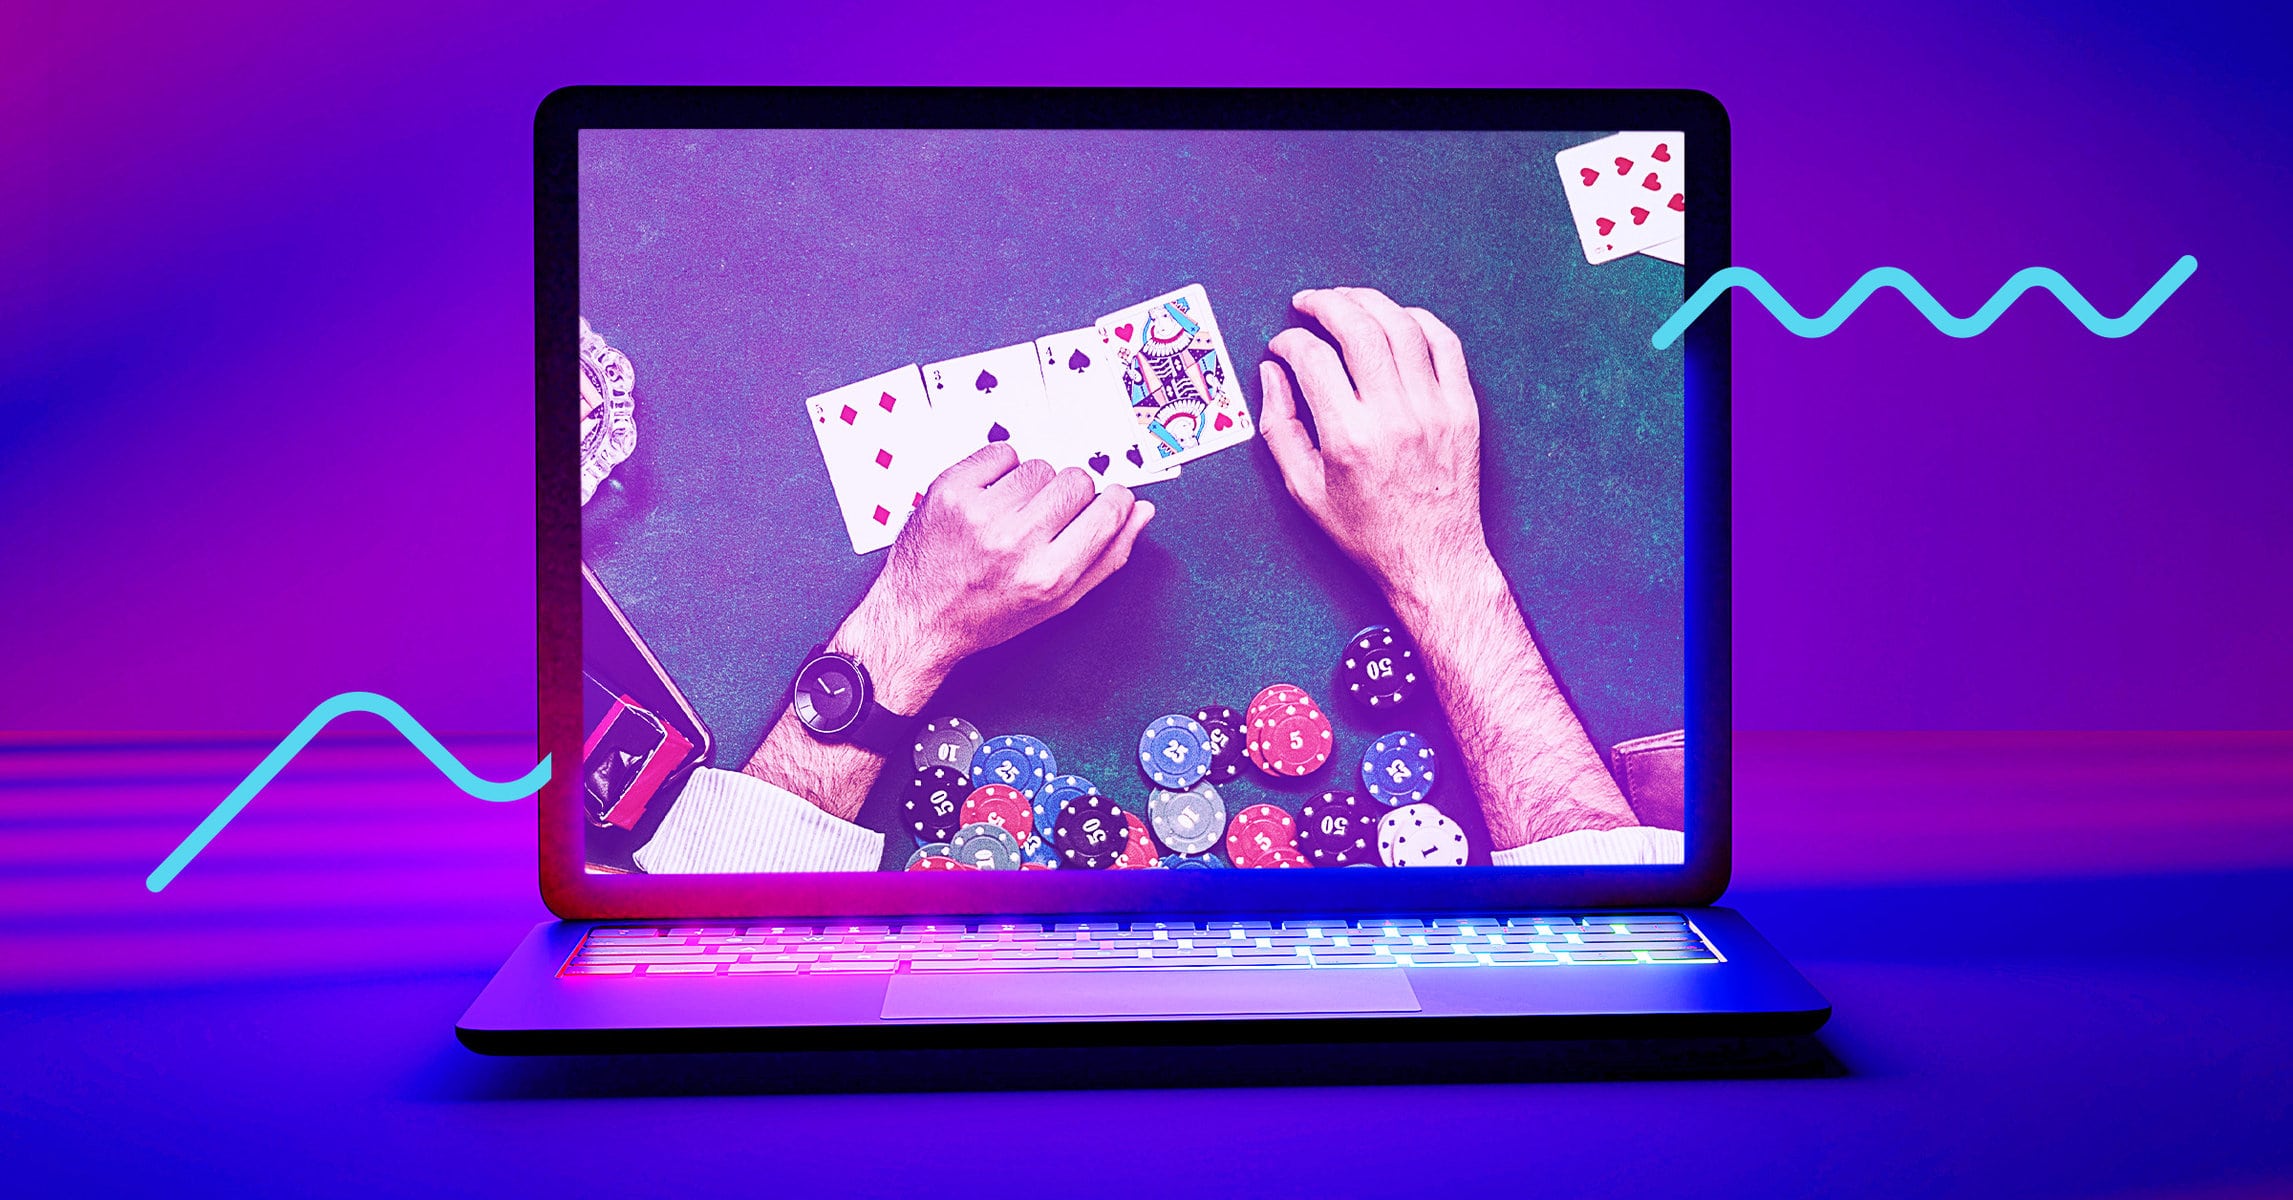 Is the iGaming Industry Taking Over the Internet?